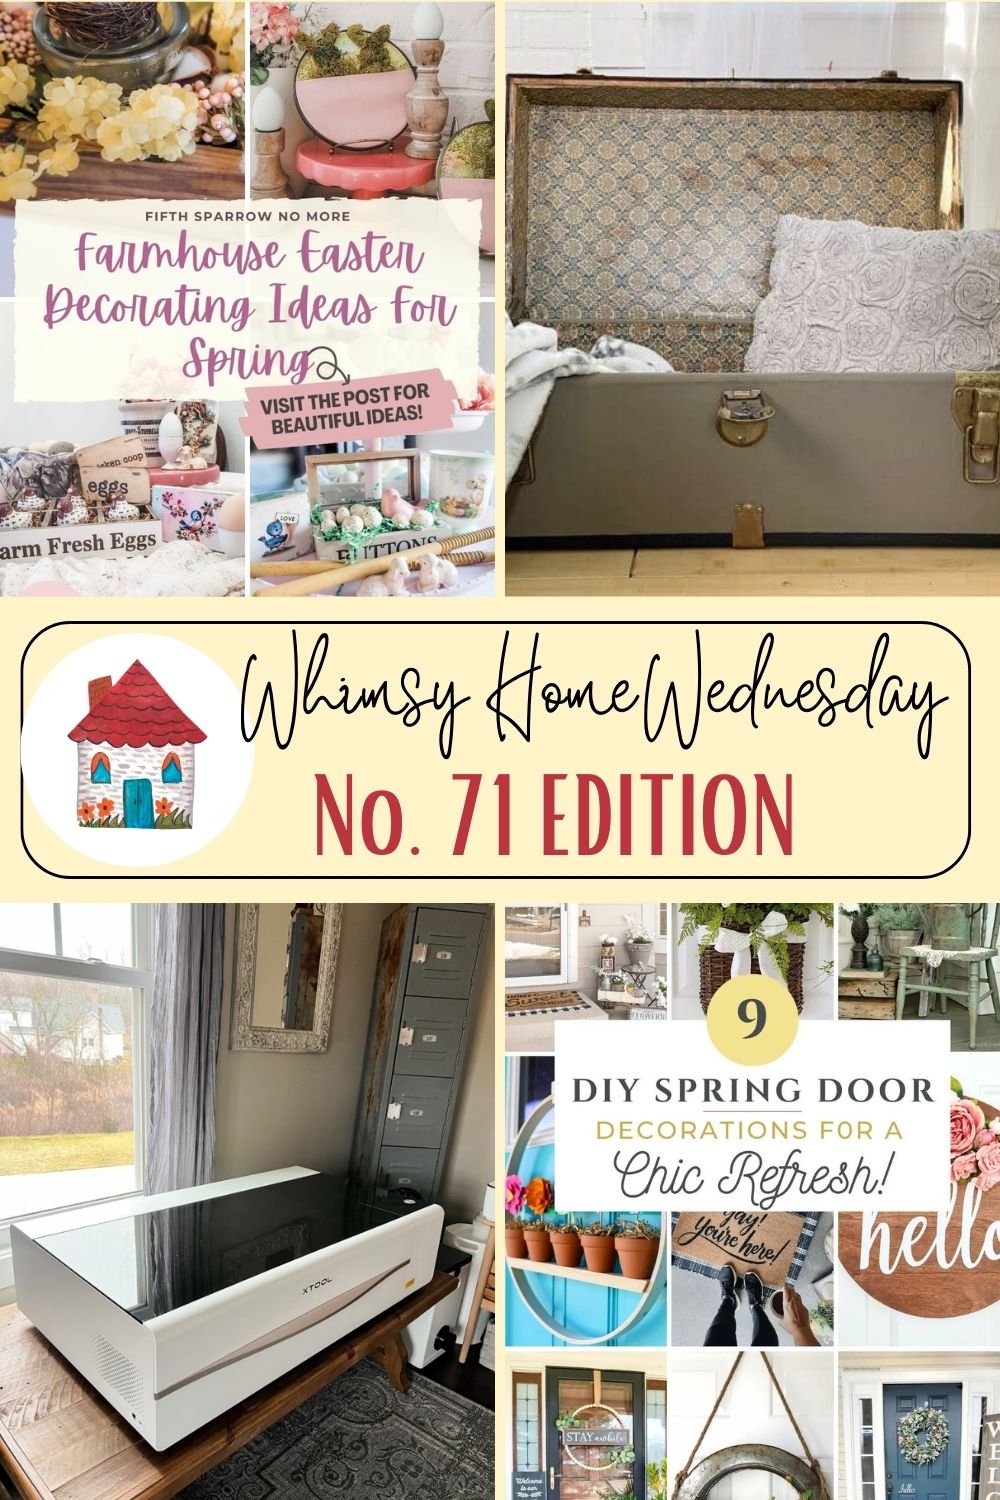 Join us on Whimsy Home Wednesday Blog Link Party No. 71 and see host projects, the features from the previous week and link up your posts!